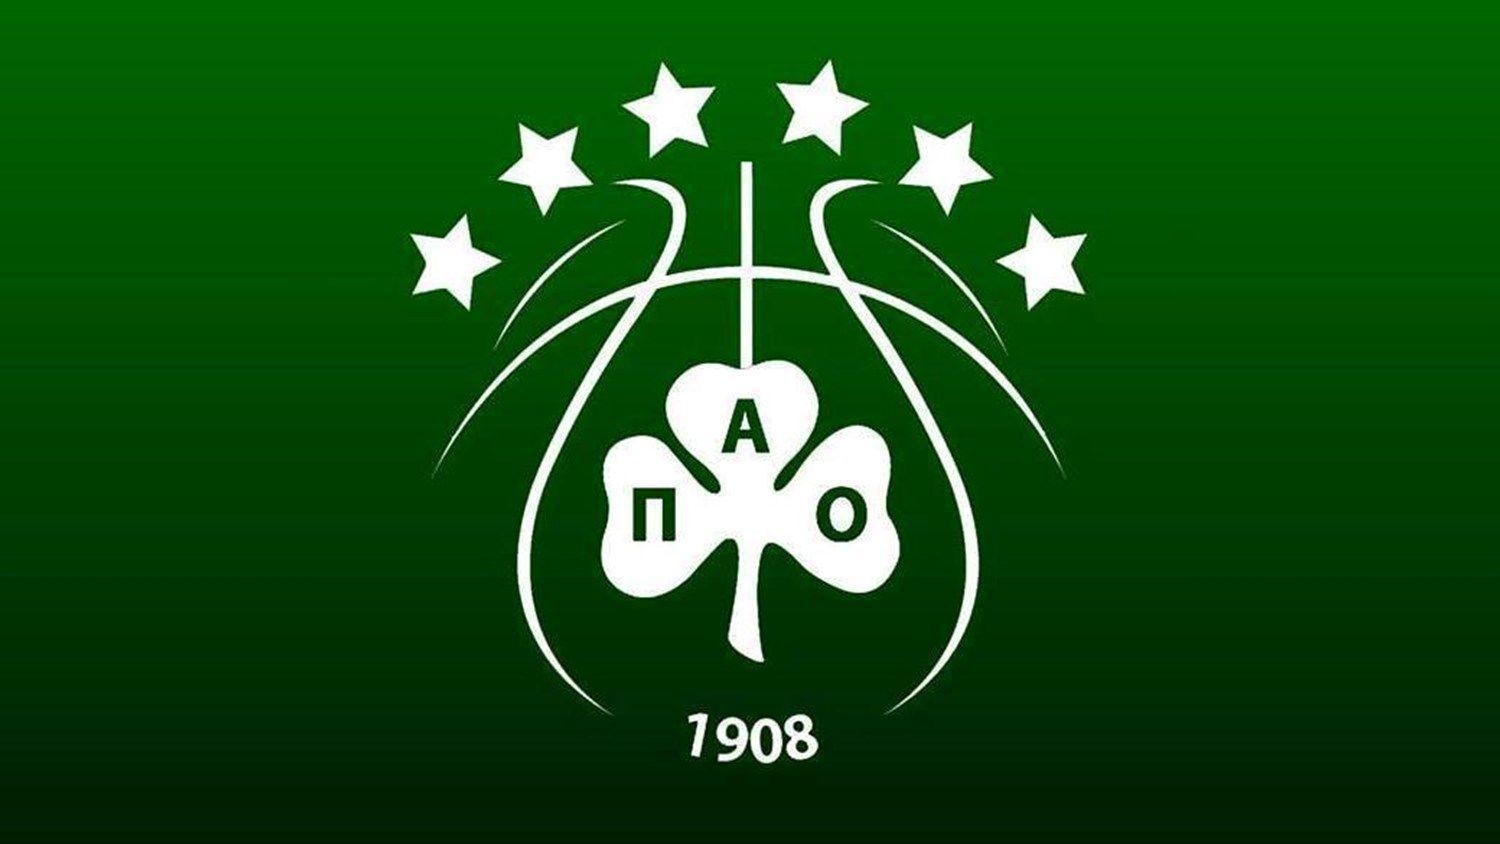 panathinaikos wallpaper for pc Wallppapers Gallery